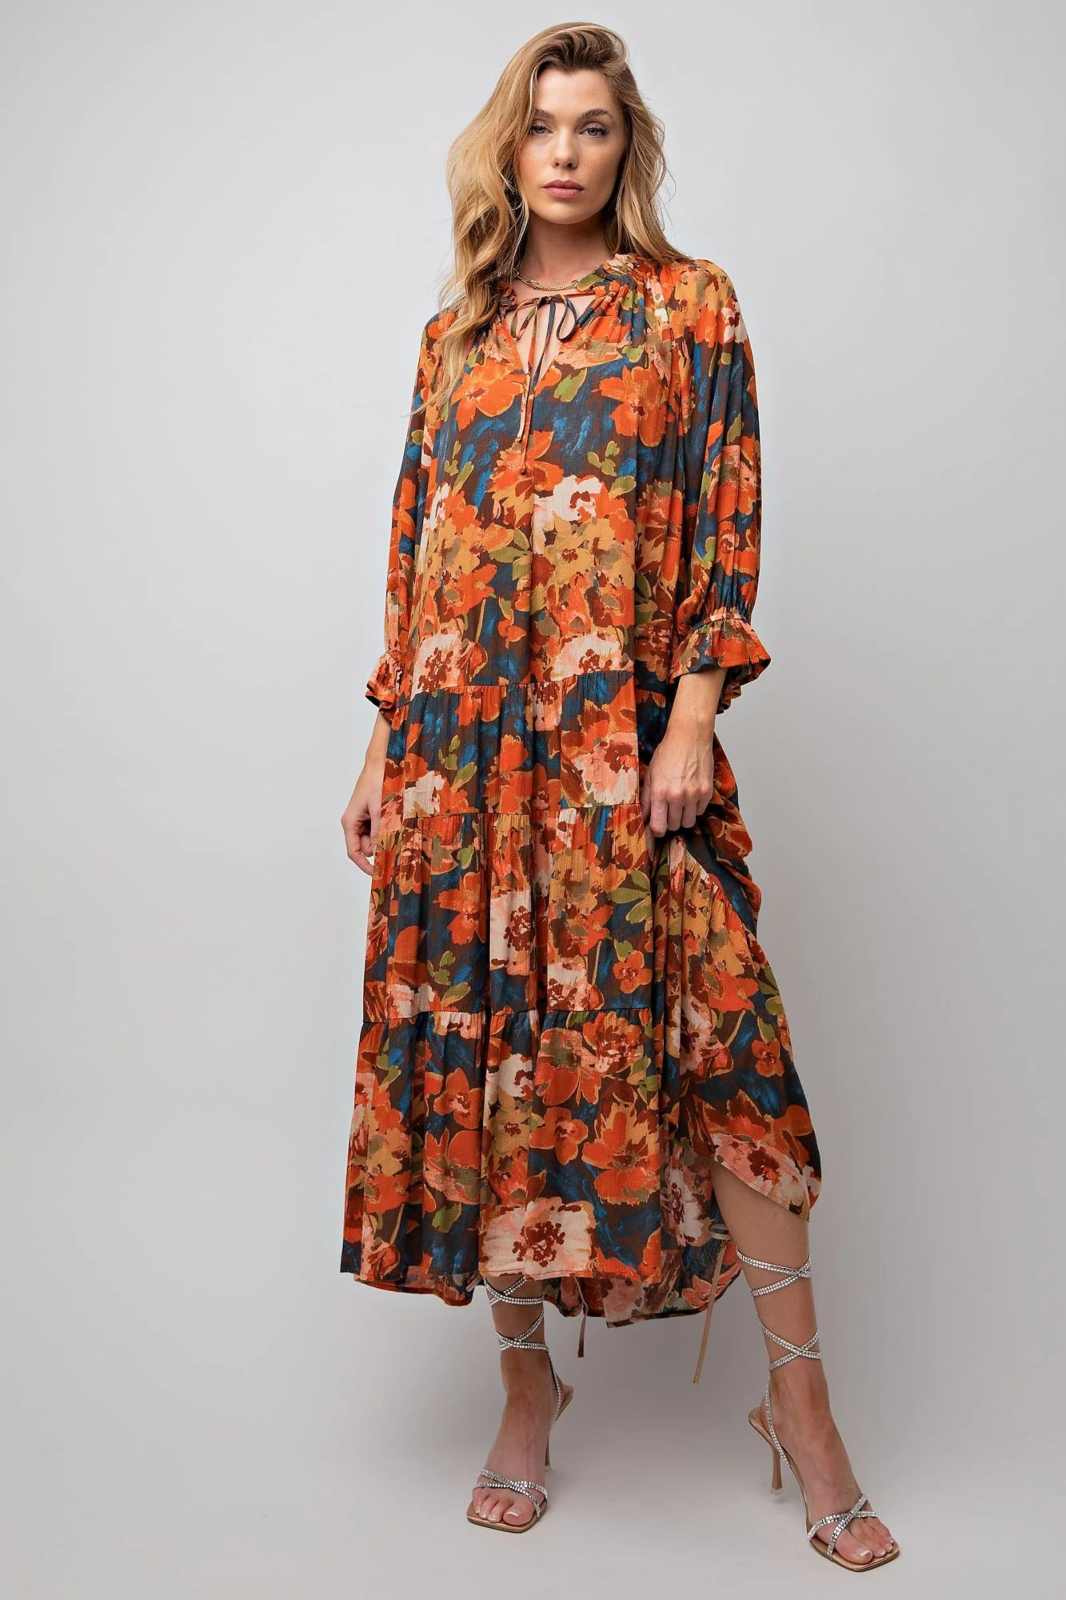 Woman wearing orange and blue springtime floral dress and silver heels